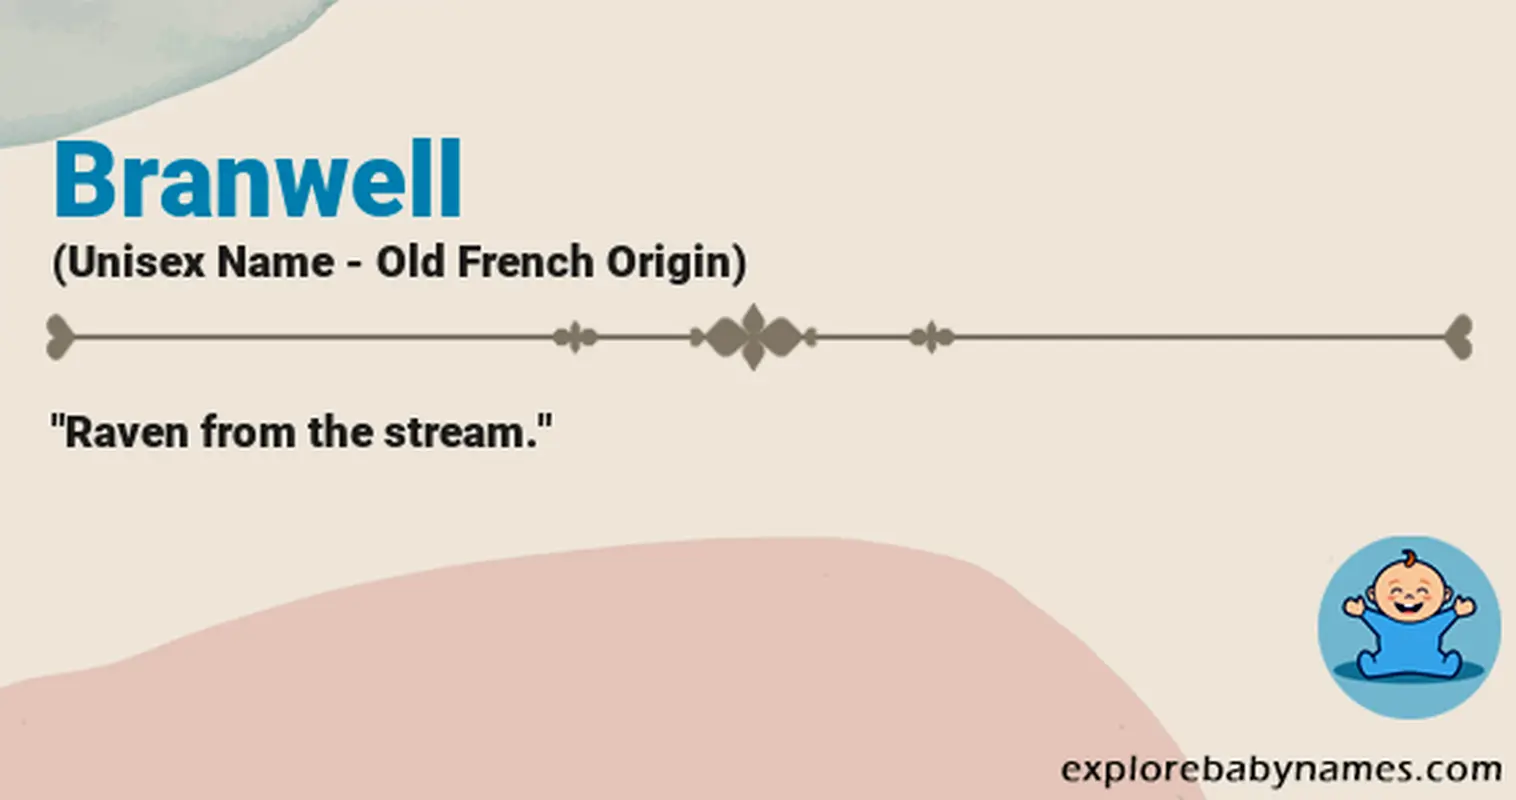 Meaning of Branwell